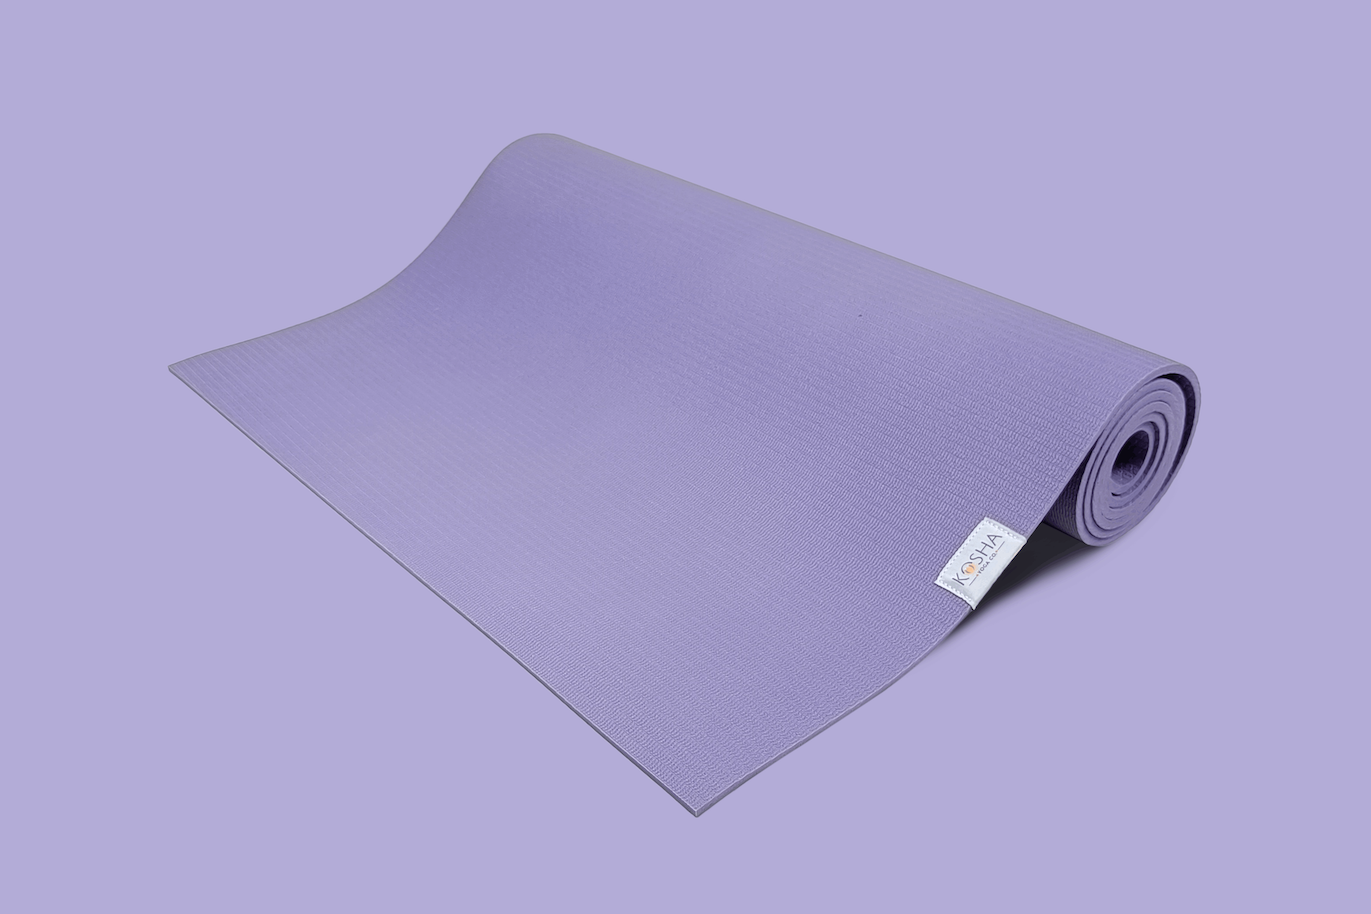 purple colour exercise mat for weights training cardio and gym by kosha yoga co